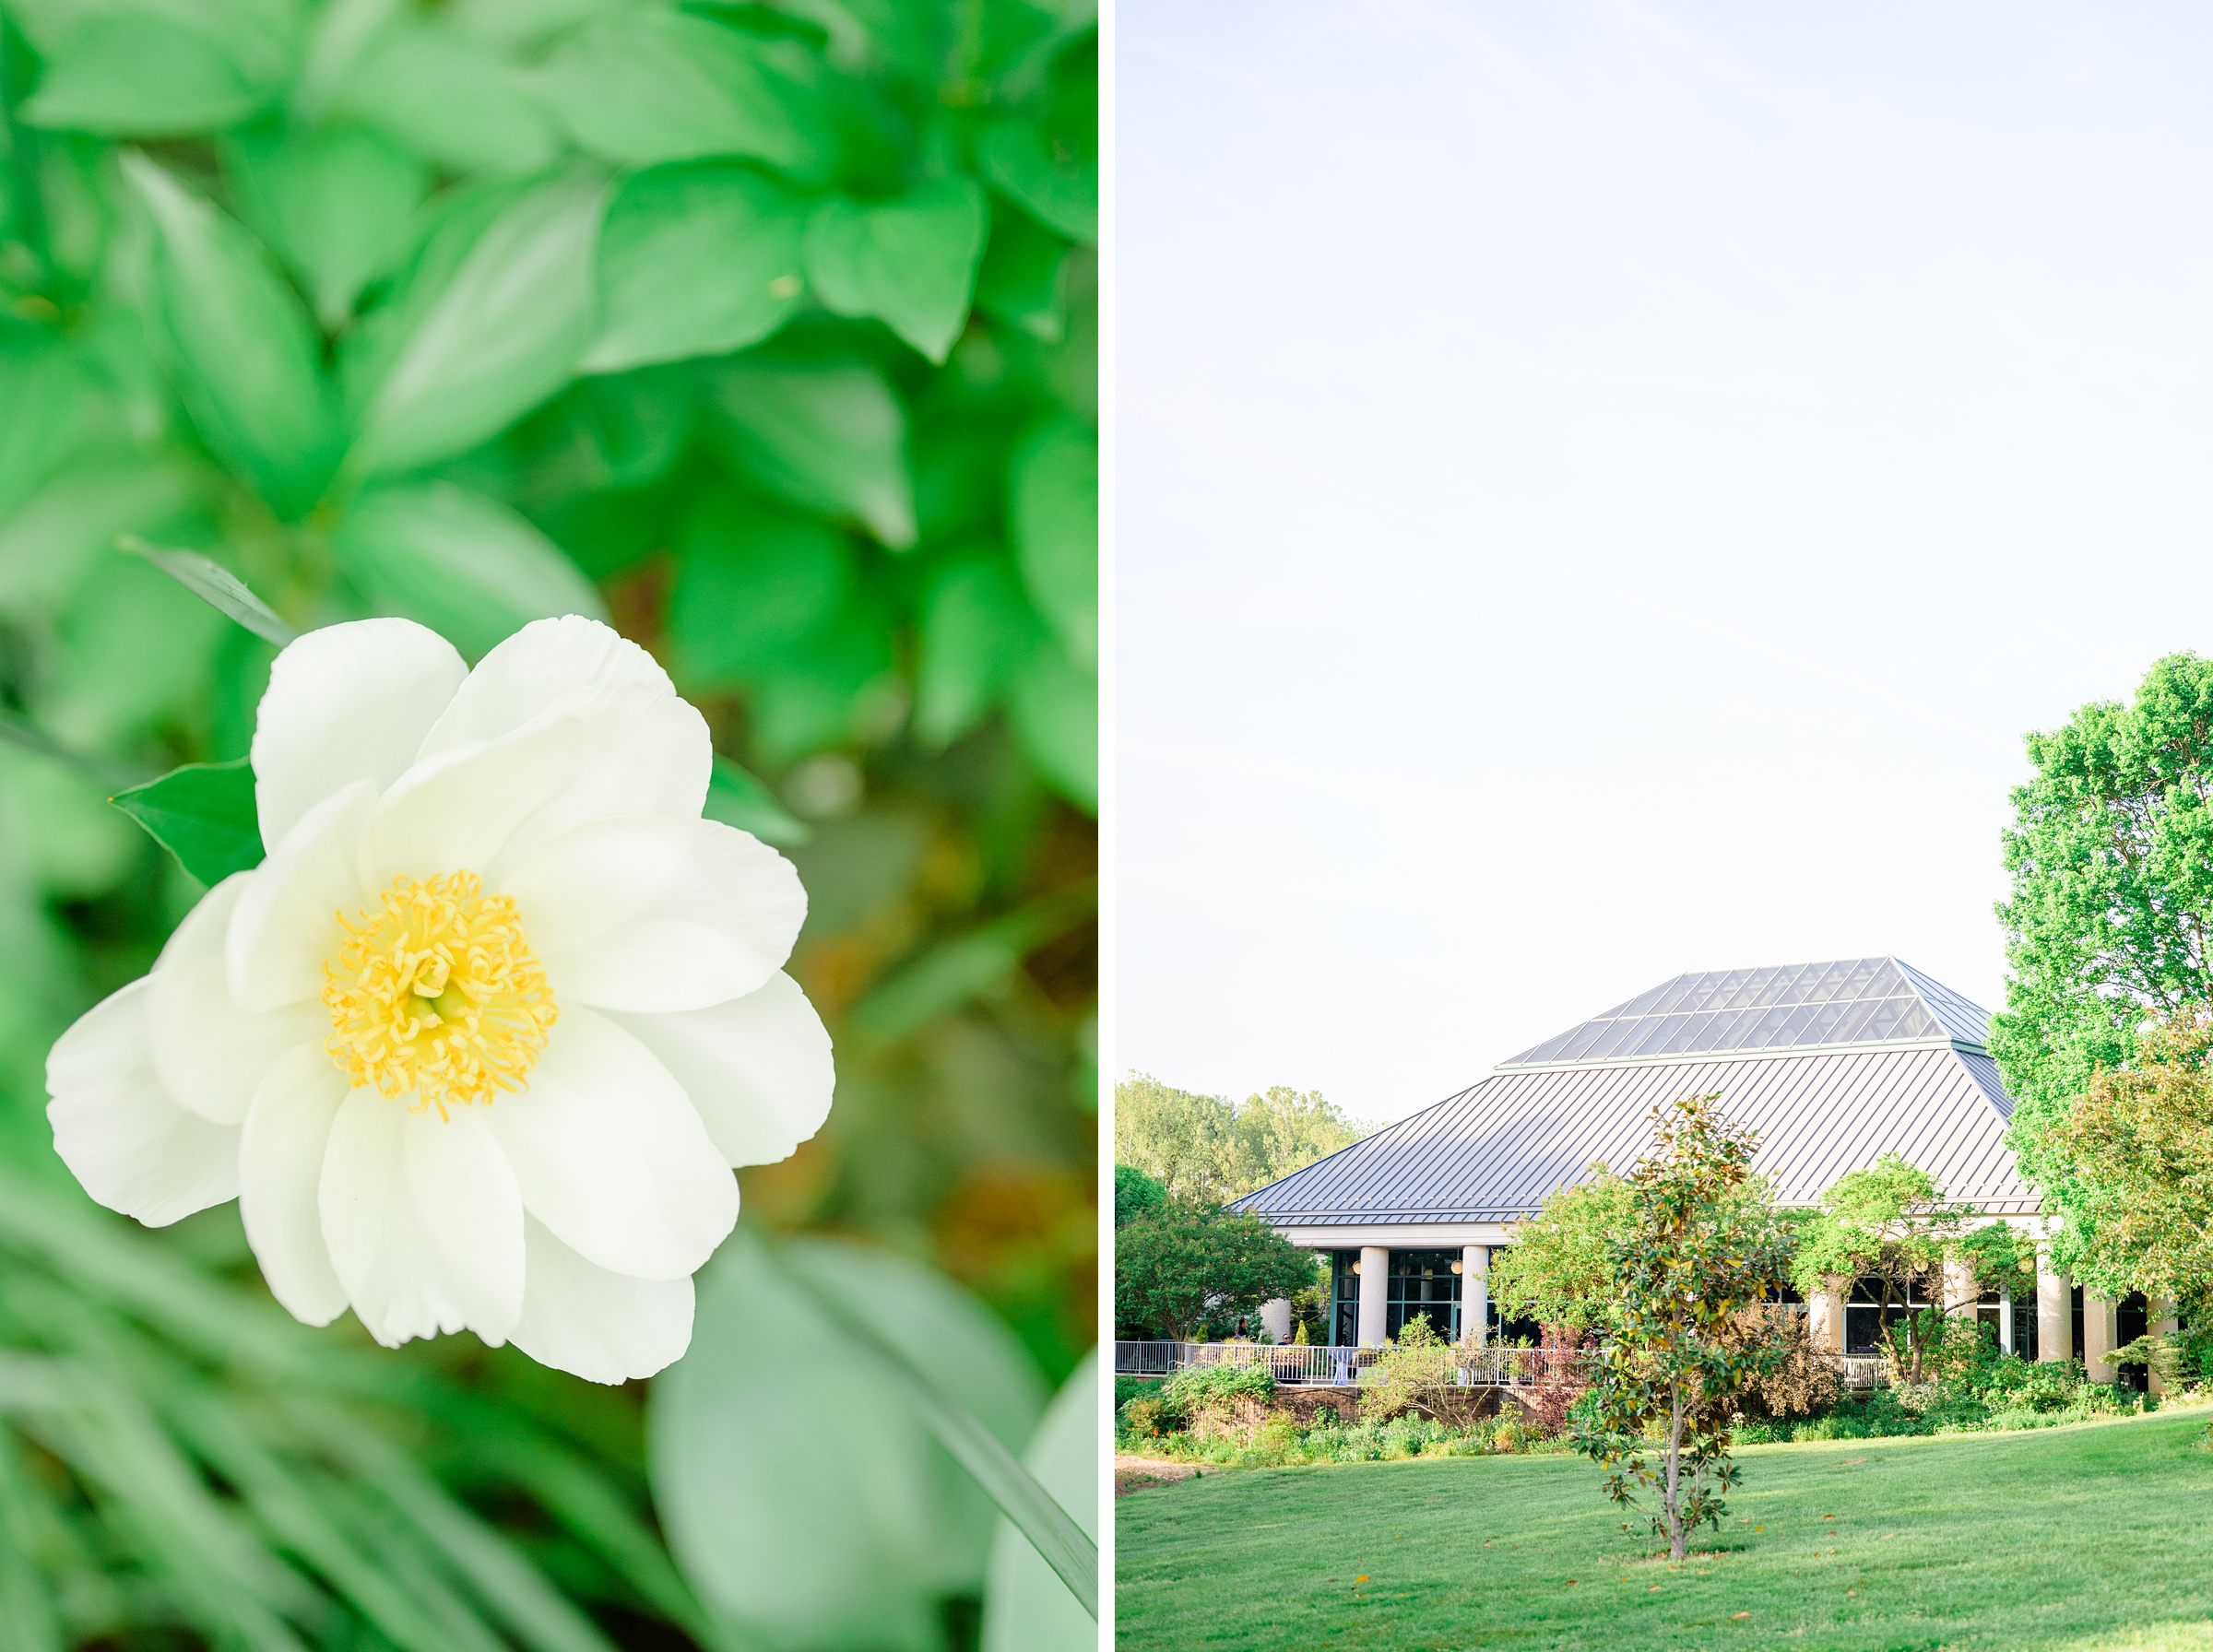 Spring wedding day at The Atrium at Meadowlark Botanical Gardens Photographed by Baltimore Wedding Photographer Cait Kramer Photography